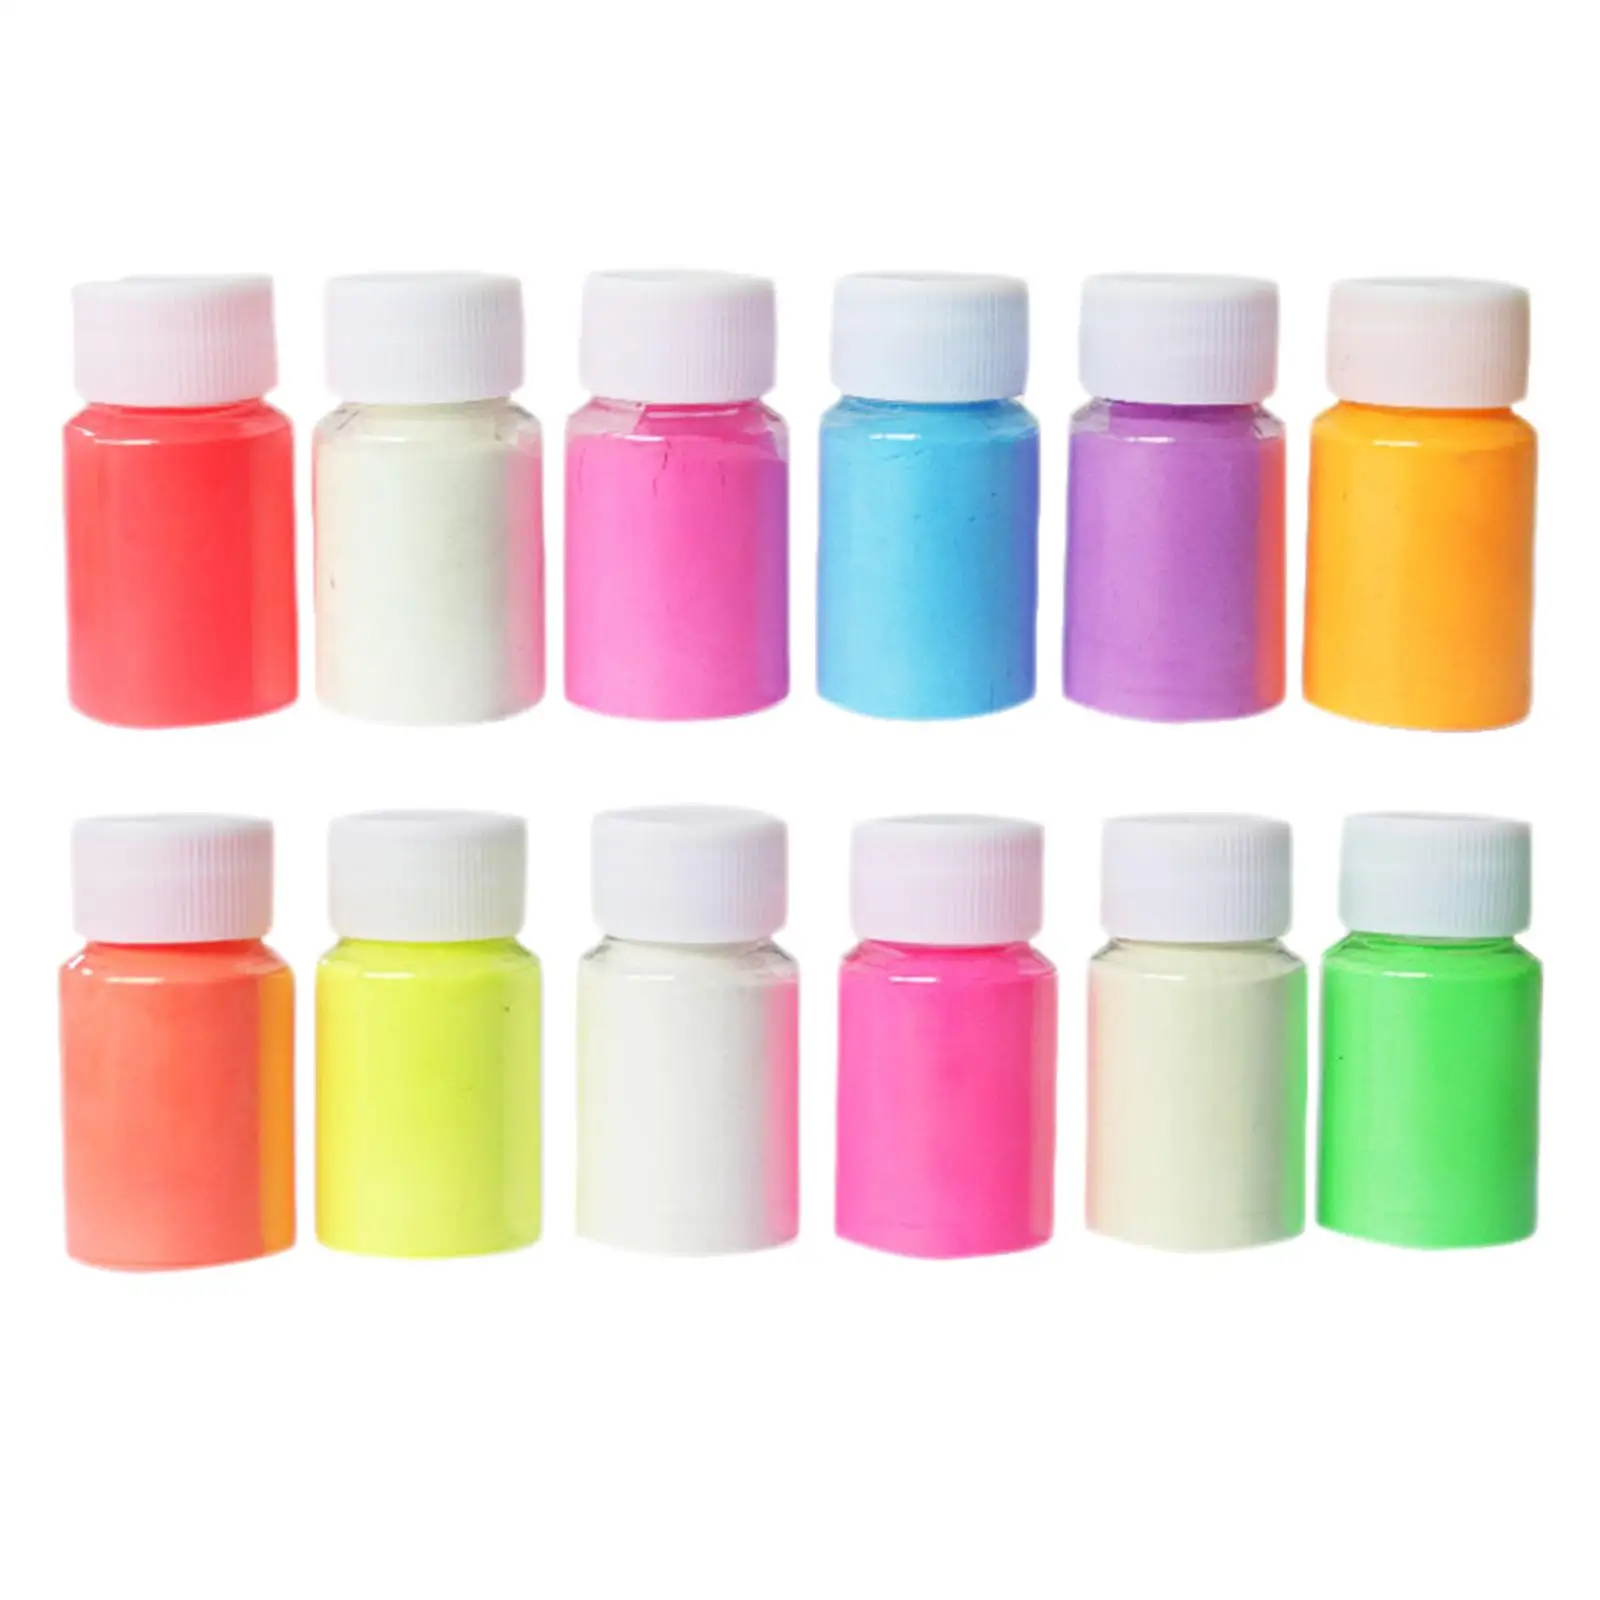 12 Colors  The Dark Pigment , Luminous  Non for Epoxy Resin ,Acrylic Paint,Resin Crafts